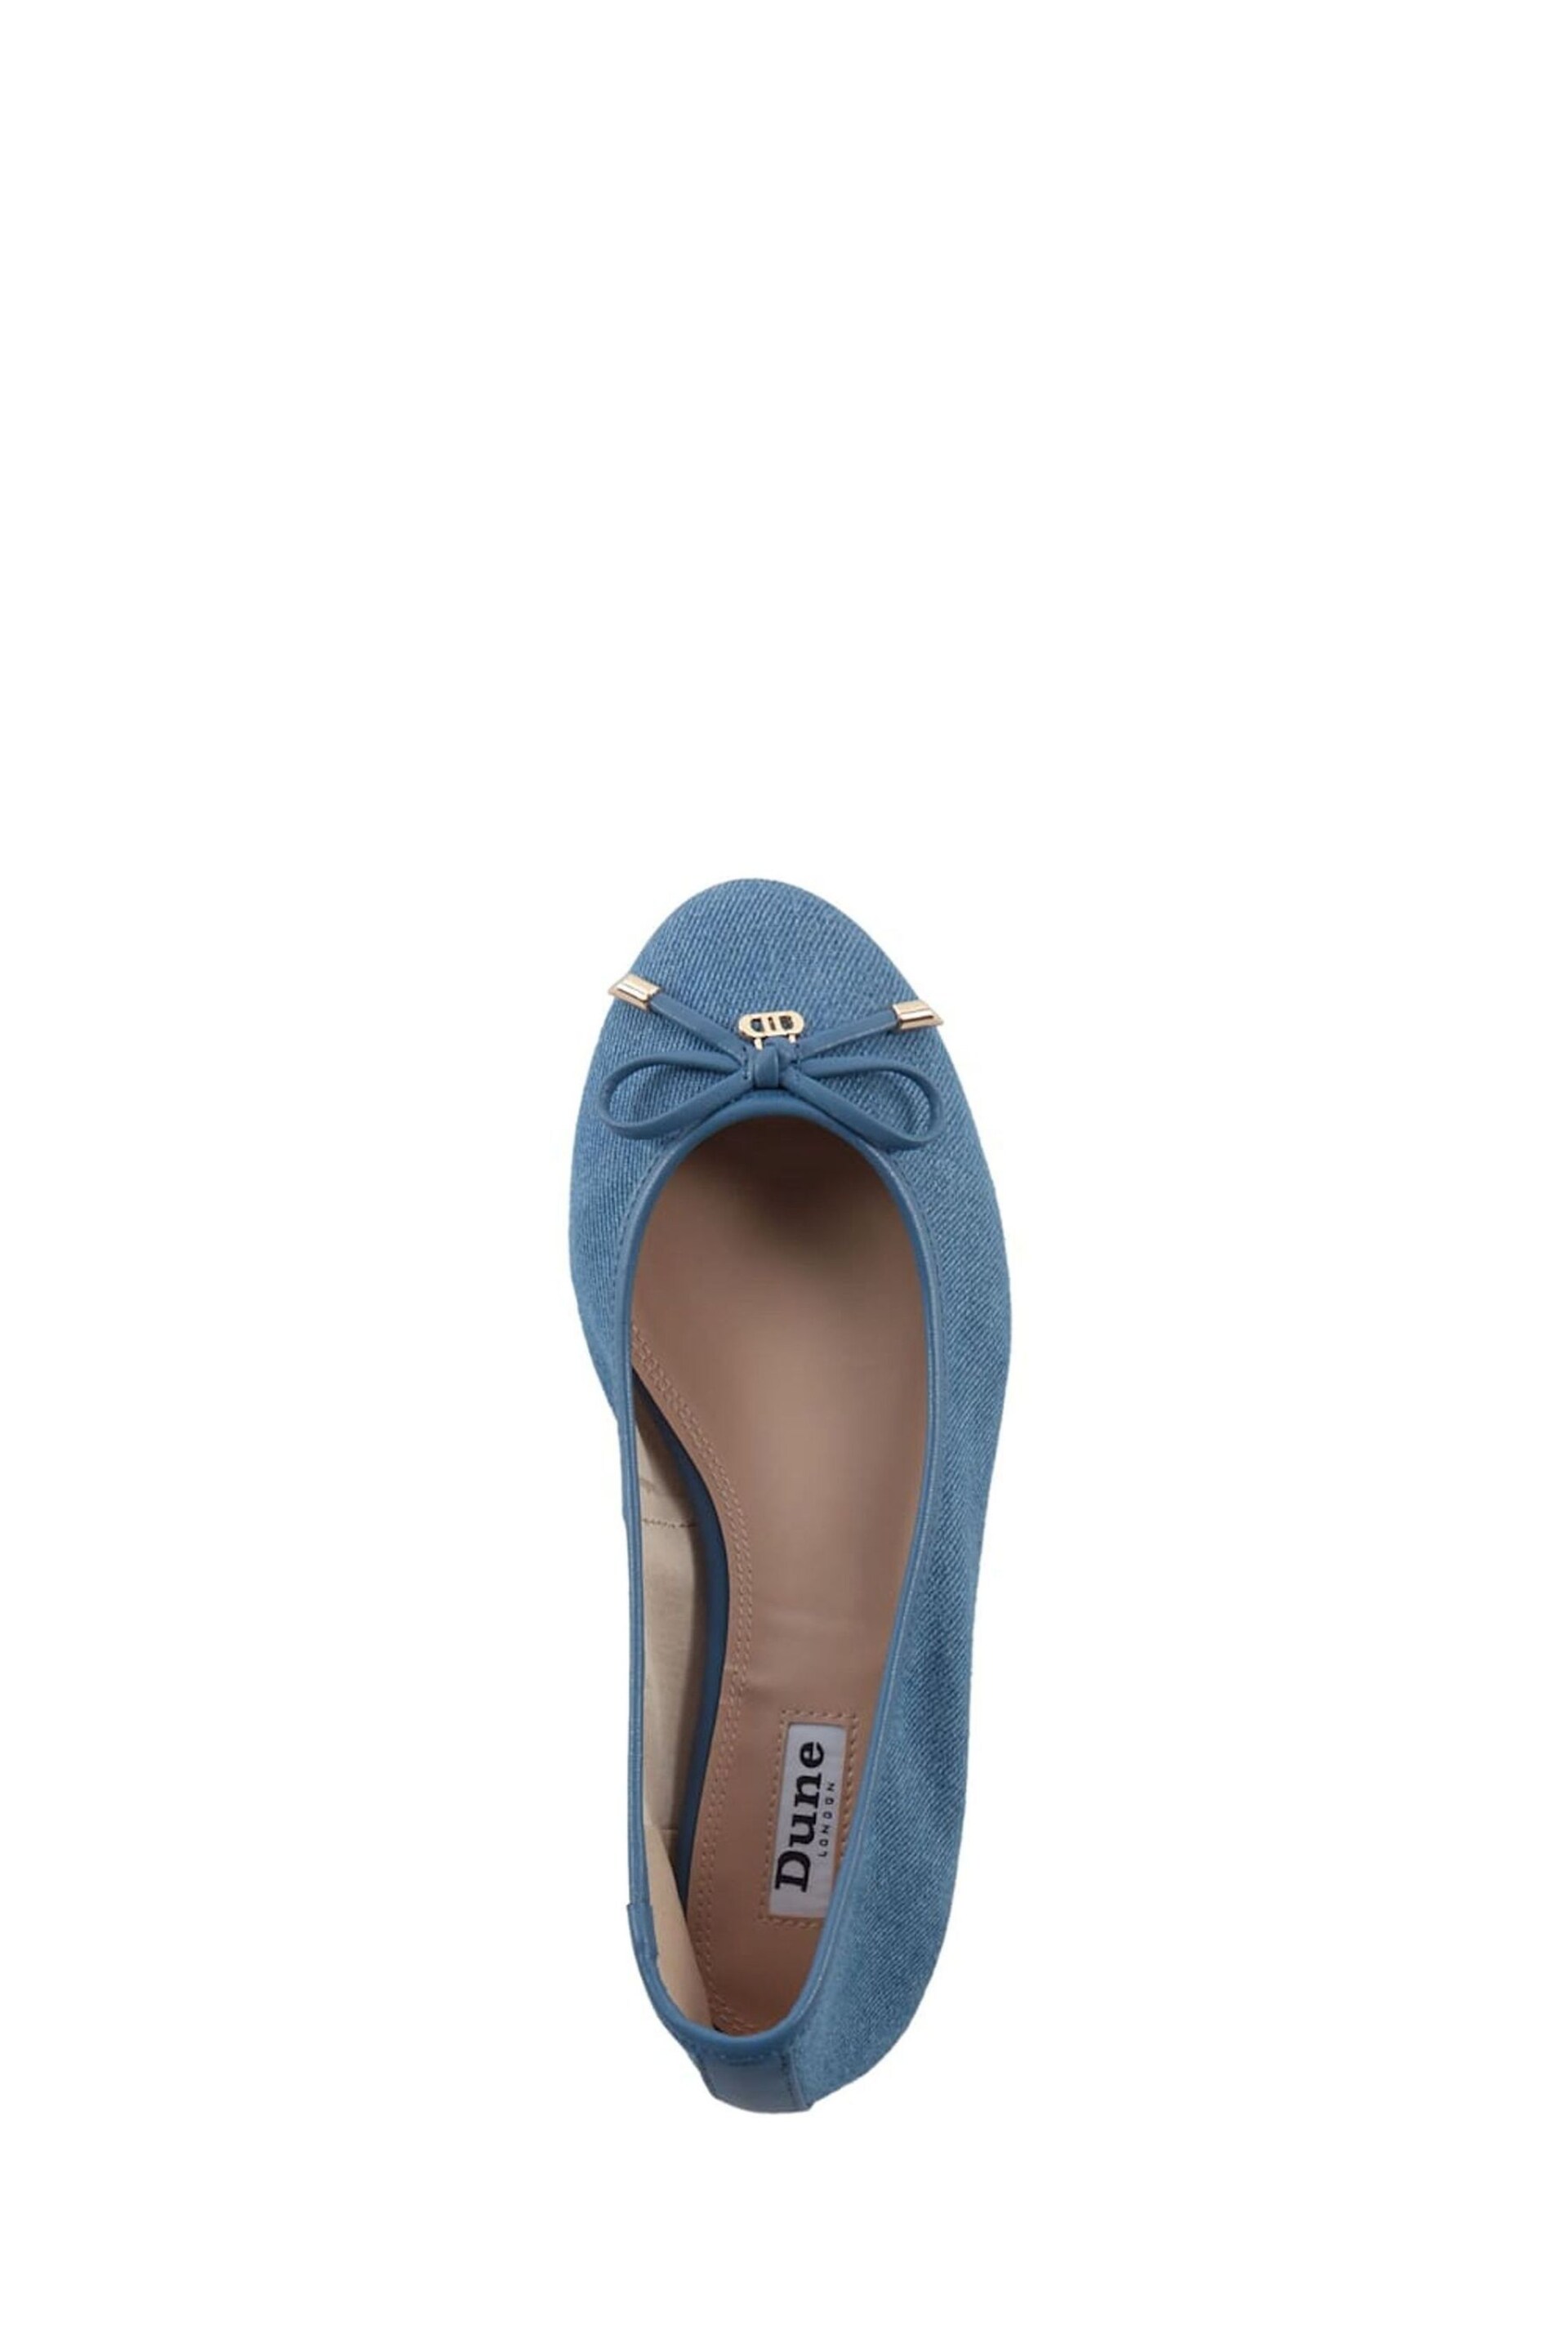 Dune London Blue Harping Branded Bow Ballerina Shoes - Image 4 of 4